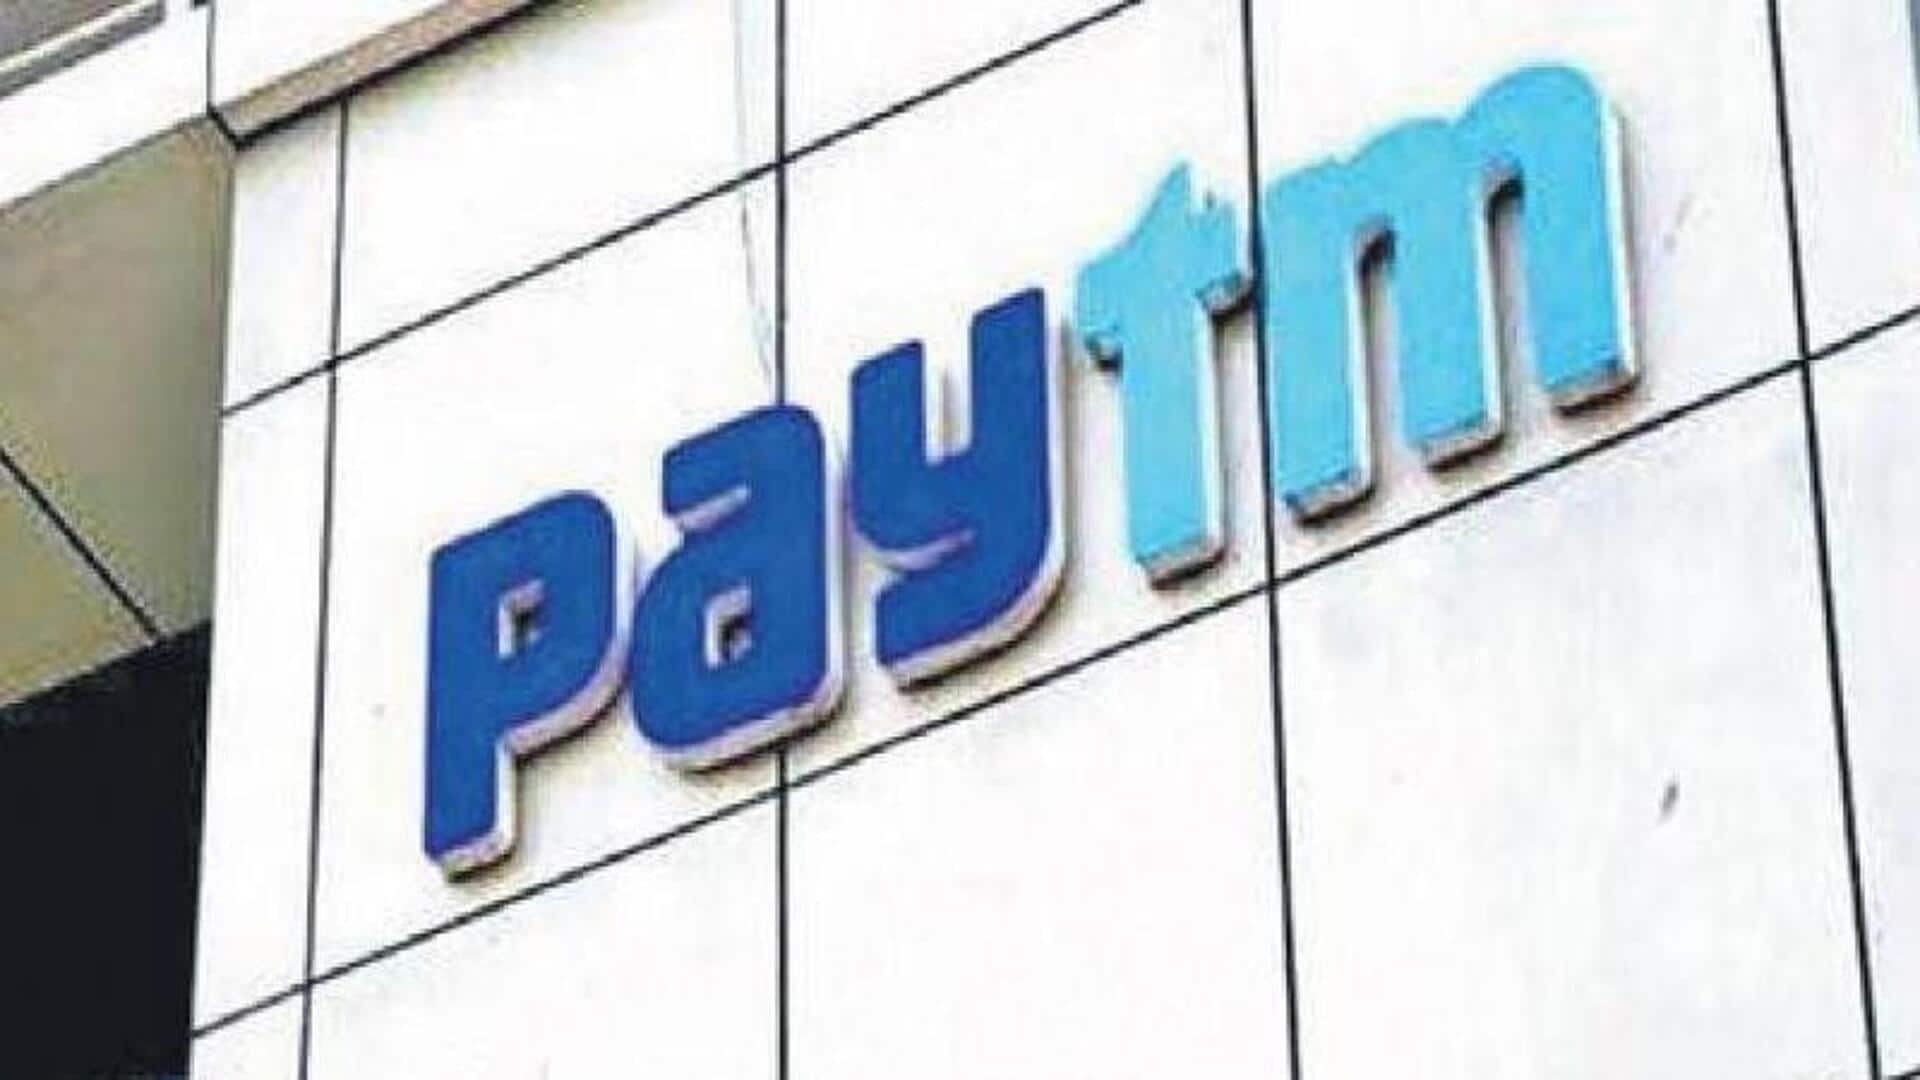 Paytm's Q2 revenue jumps 32% YoY to over Rs. 2,500cr